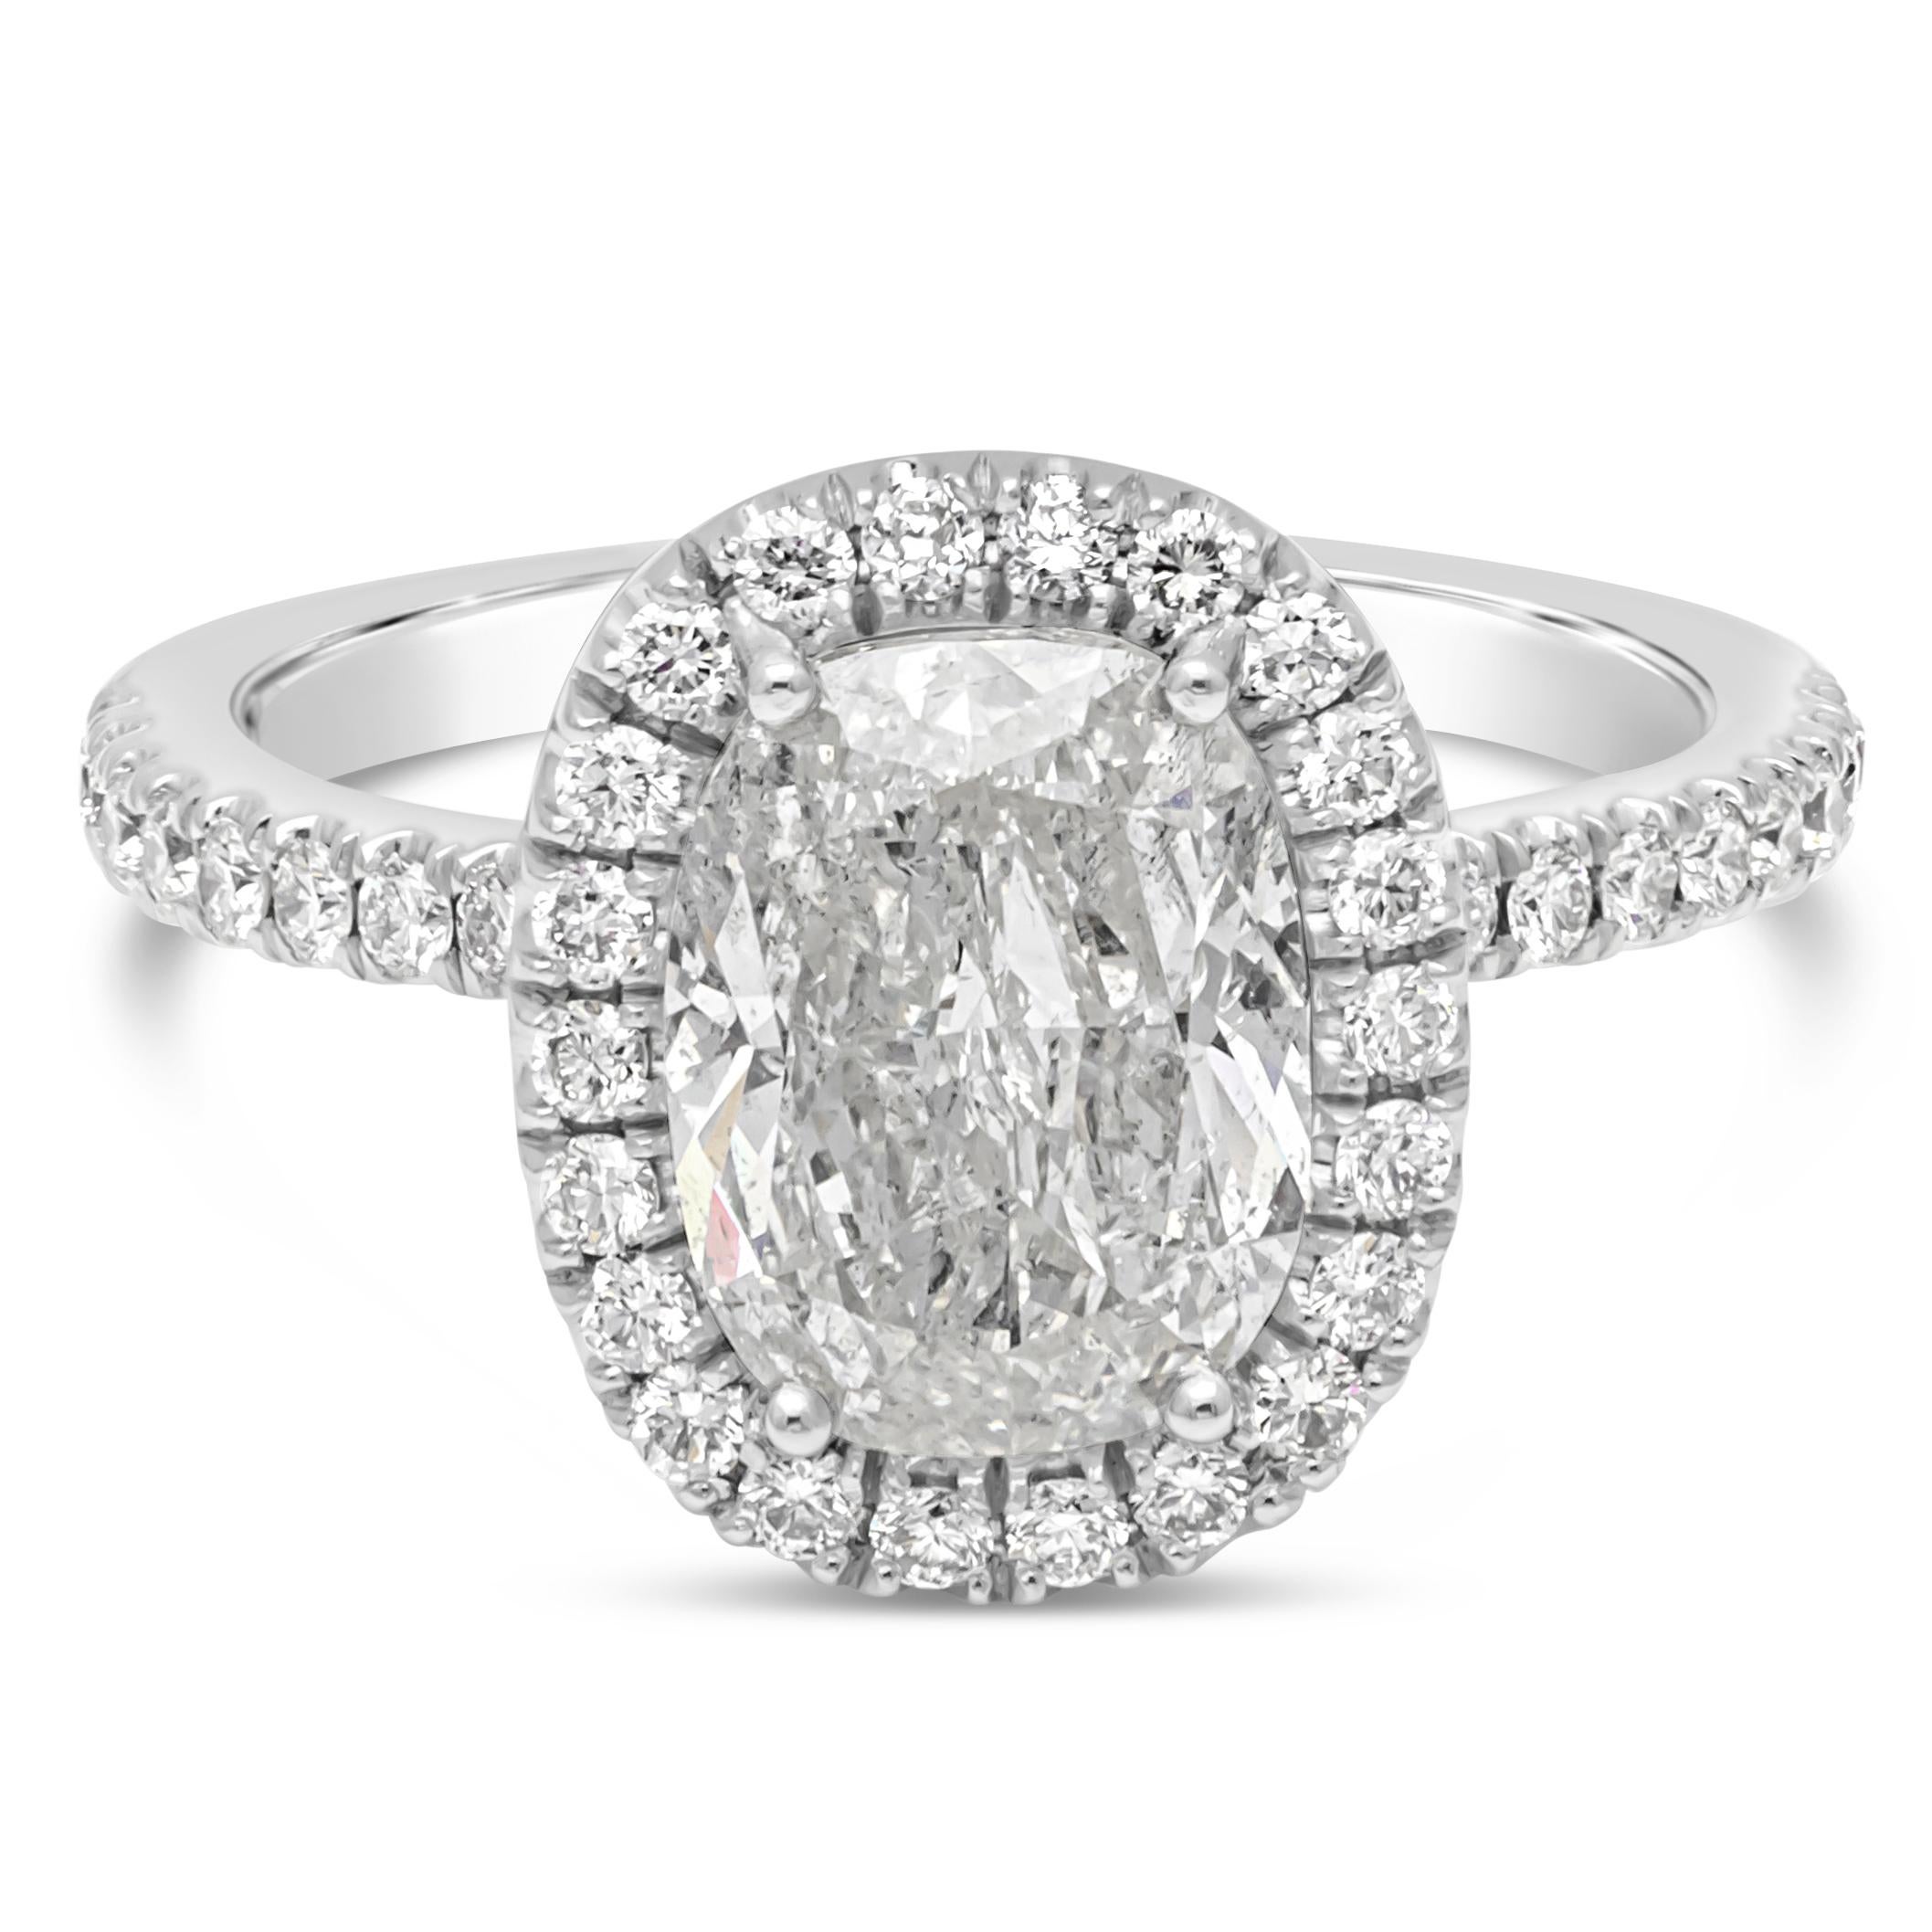 A classic engagement ring style showcasing a 2.07 carat rectangular cushion cut diamond, F color, I1 in clarity EGL Certified. Center stone accented by a row of round brilliant diamonds. Set in a haft eternity pave made in 18K white gold. Accent